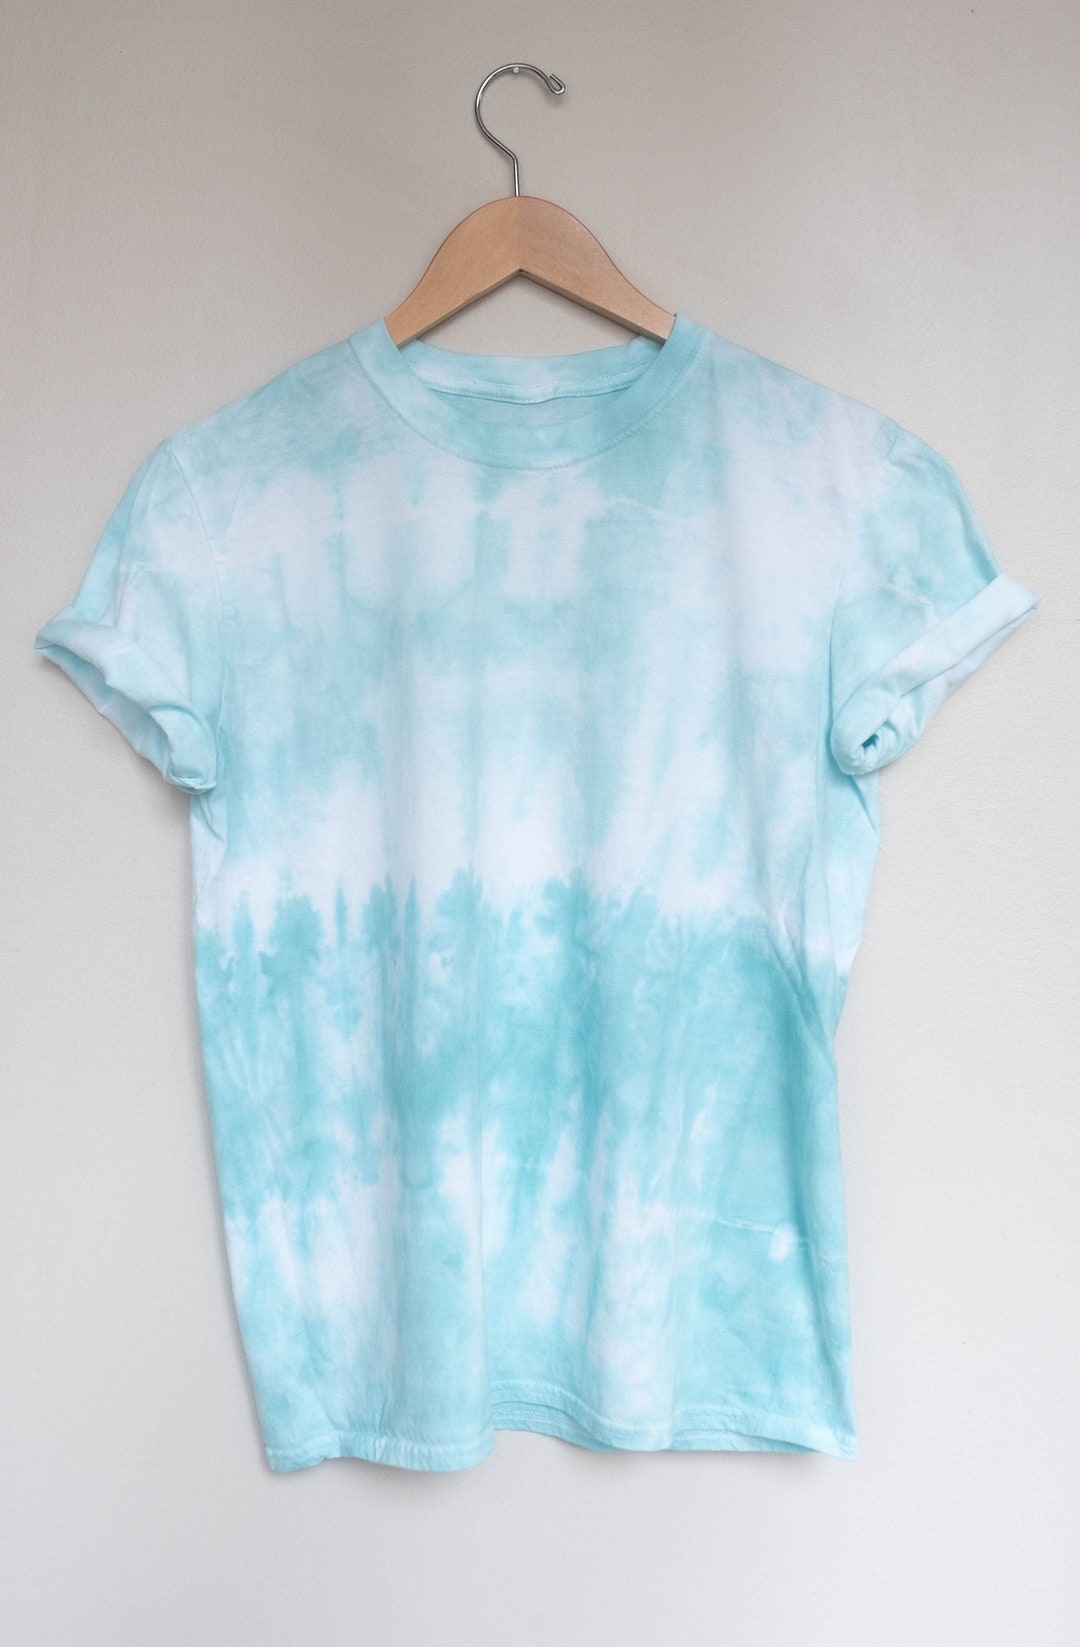 Teal Ombre Tie Dye T-shirt - Etsy